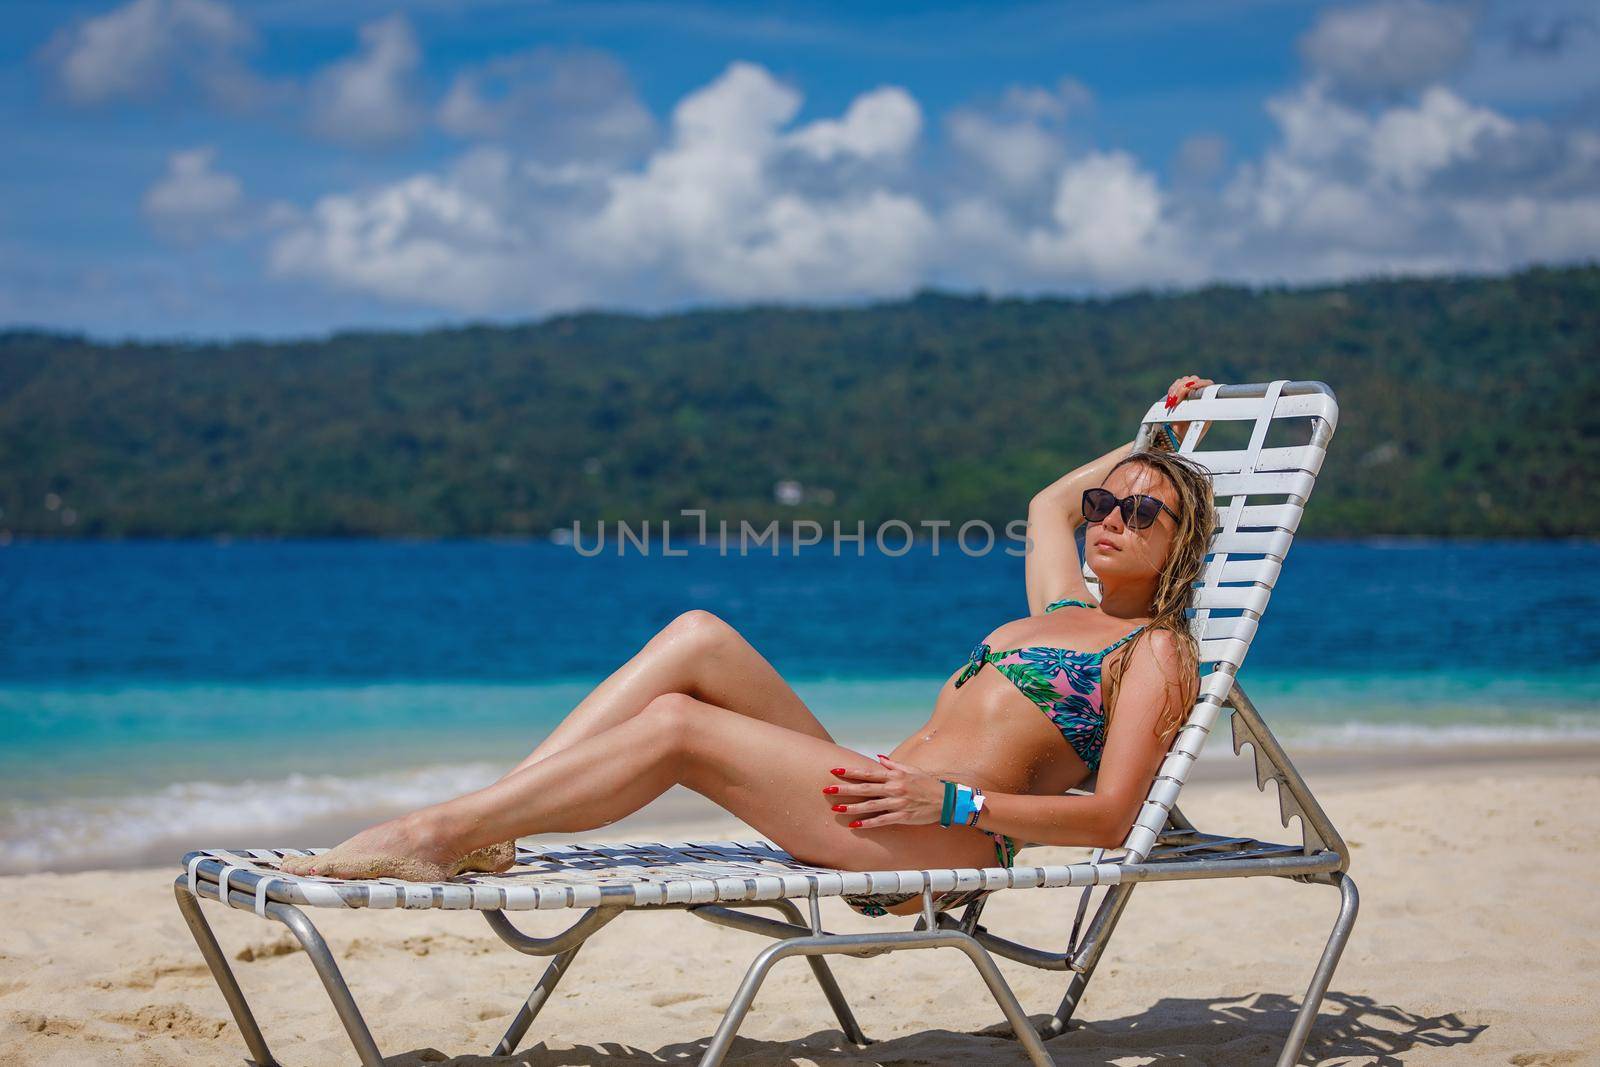 A young beautiful girl sunbathes on a sun lounger by the ocean. White sand, azure water